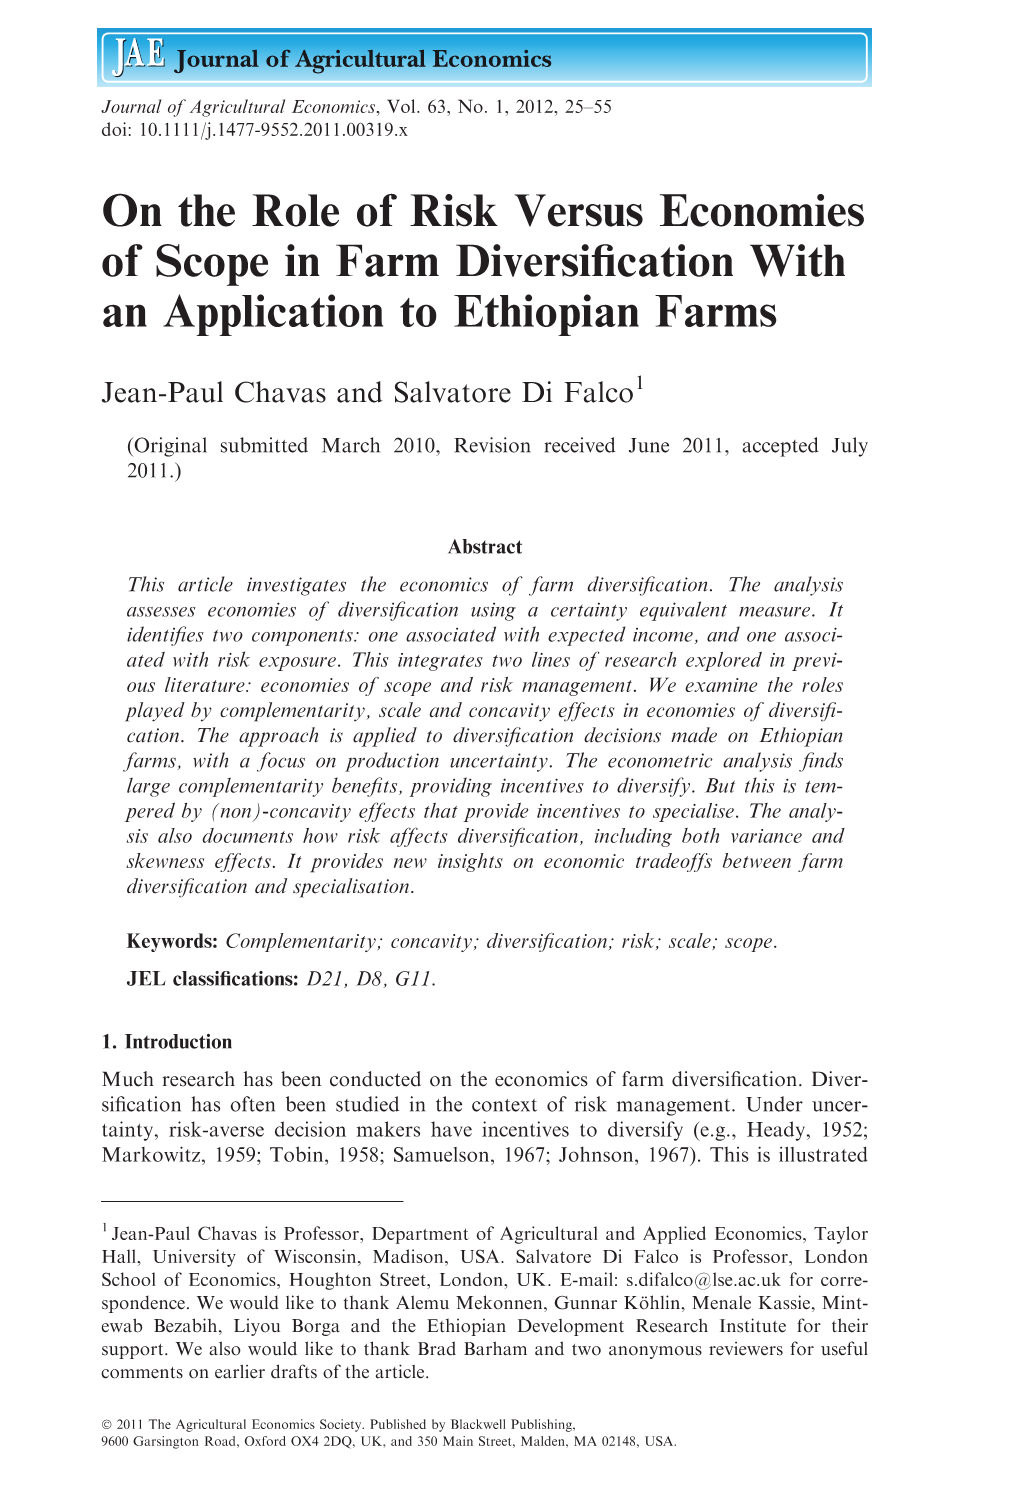 On the Role of Risk Versus Economies of Scope in Farm Diversiﬁcation with an Application to Ethiopian Farms